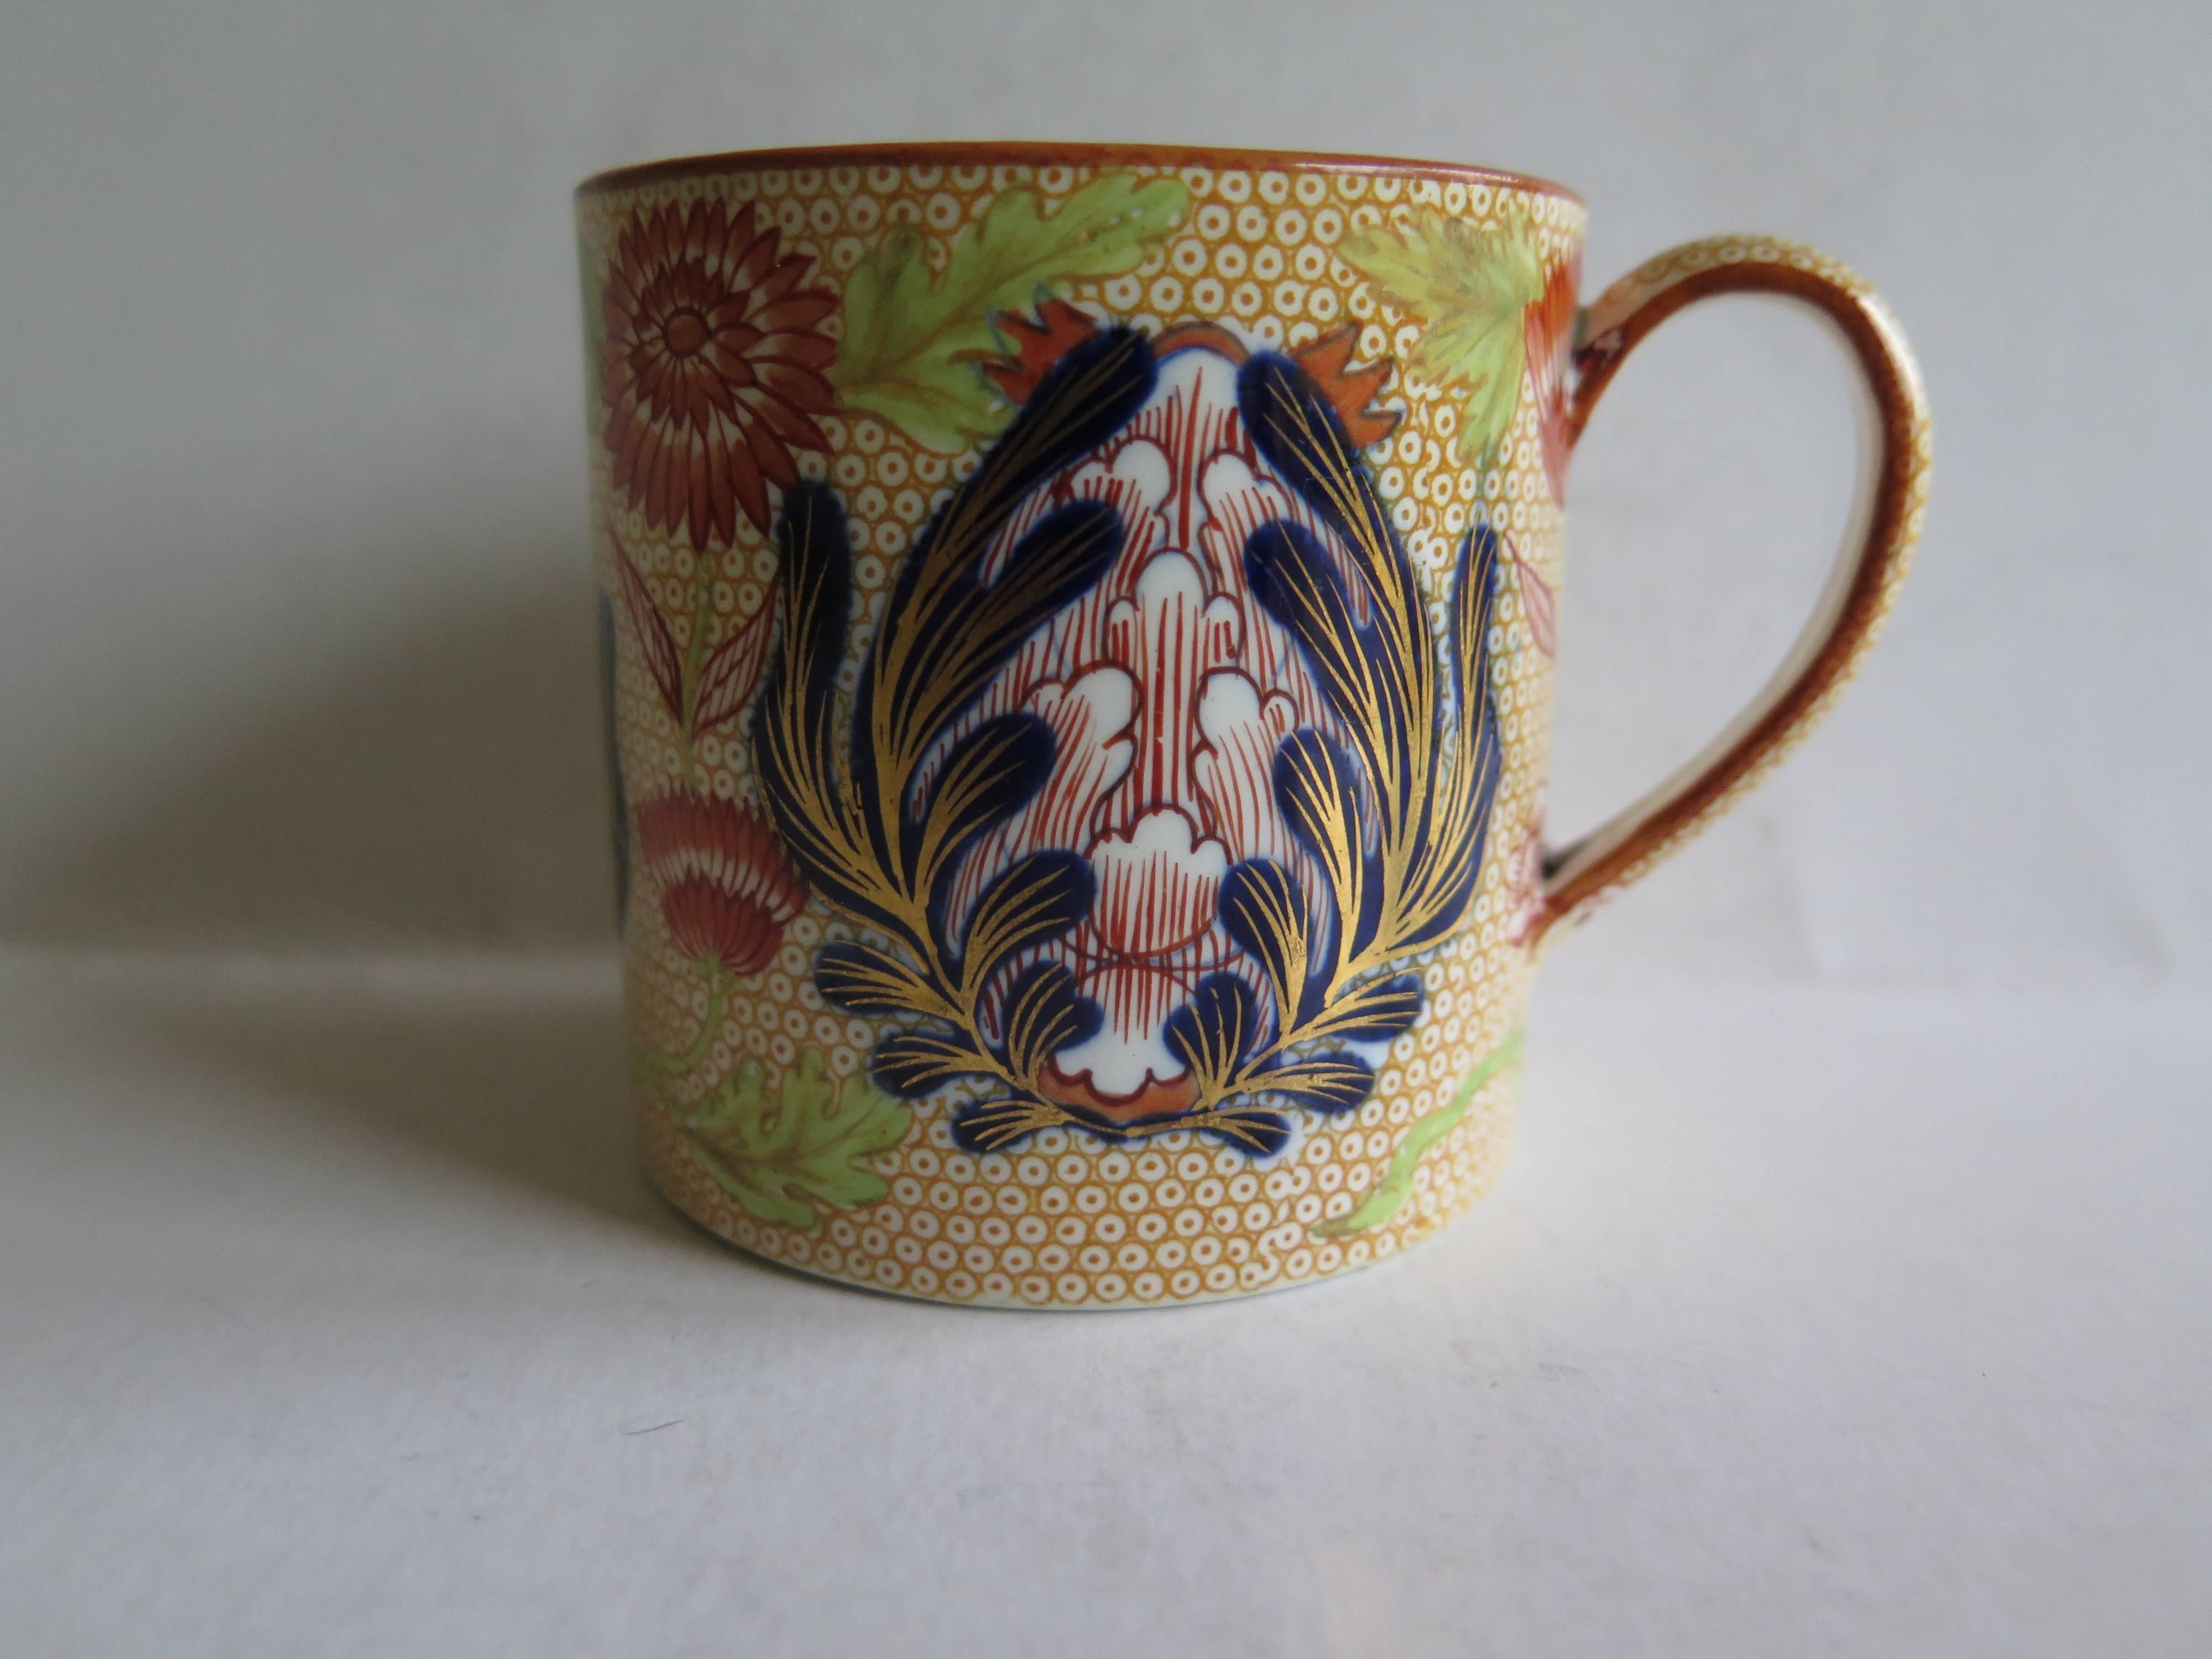 This is a beautiful COFFEE CAN by the WEDGWOOD factory from the late George 111 period, made very early in the 19th Century, circa 1800 to 1810.

The coffee can has a generous loop handle and is made of 